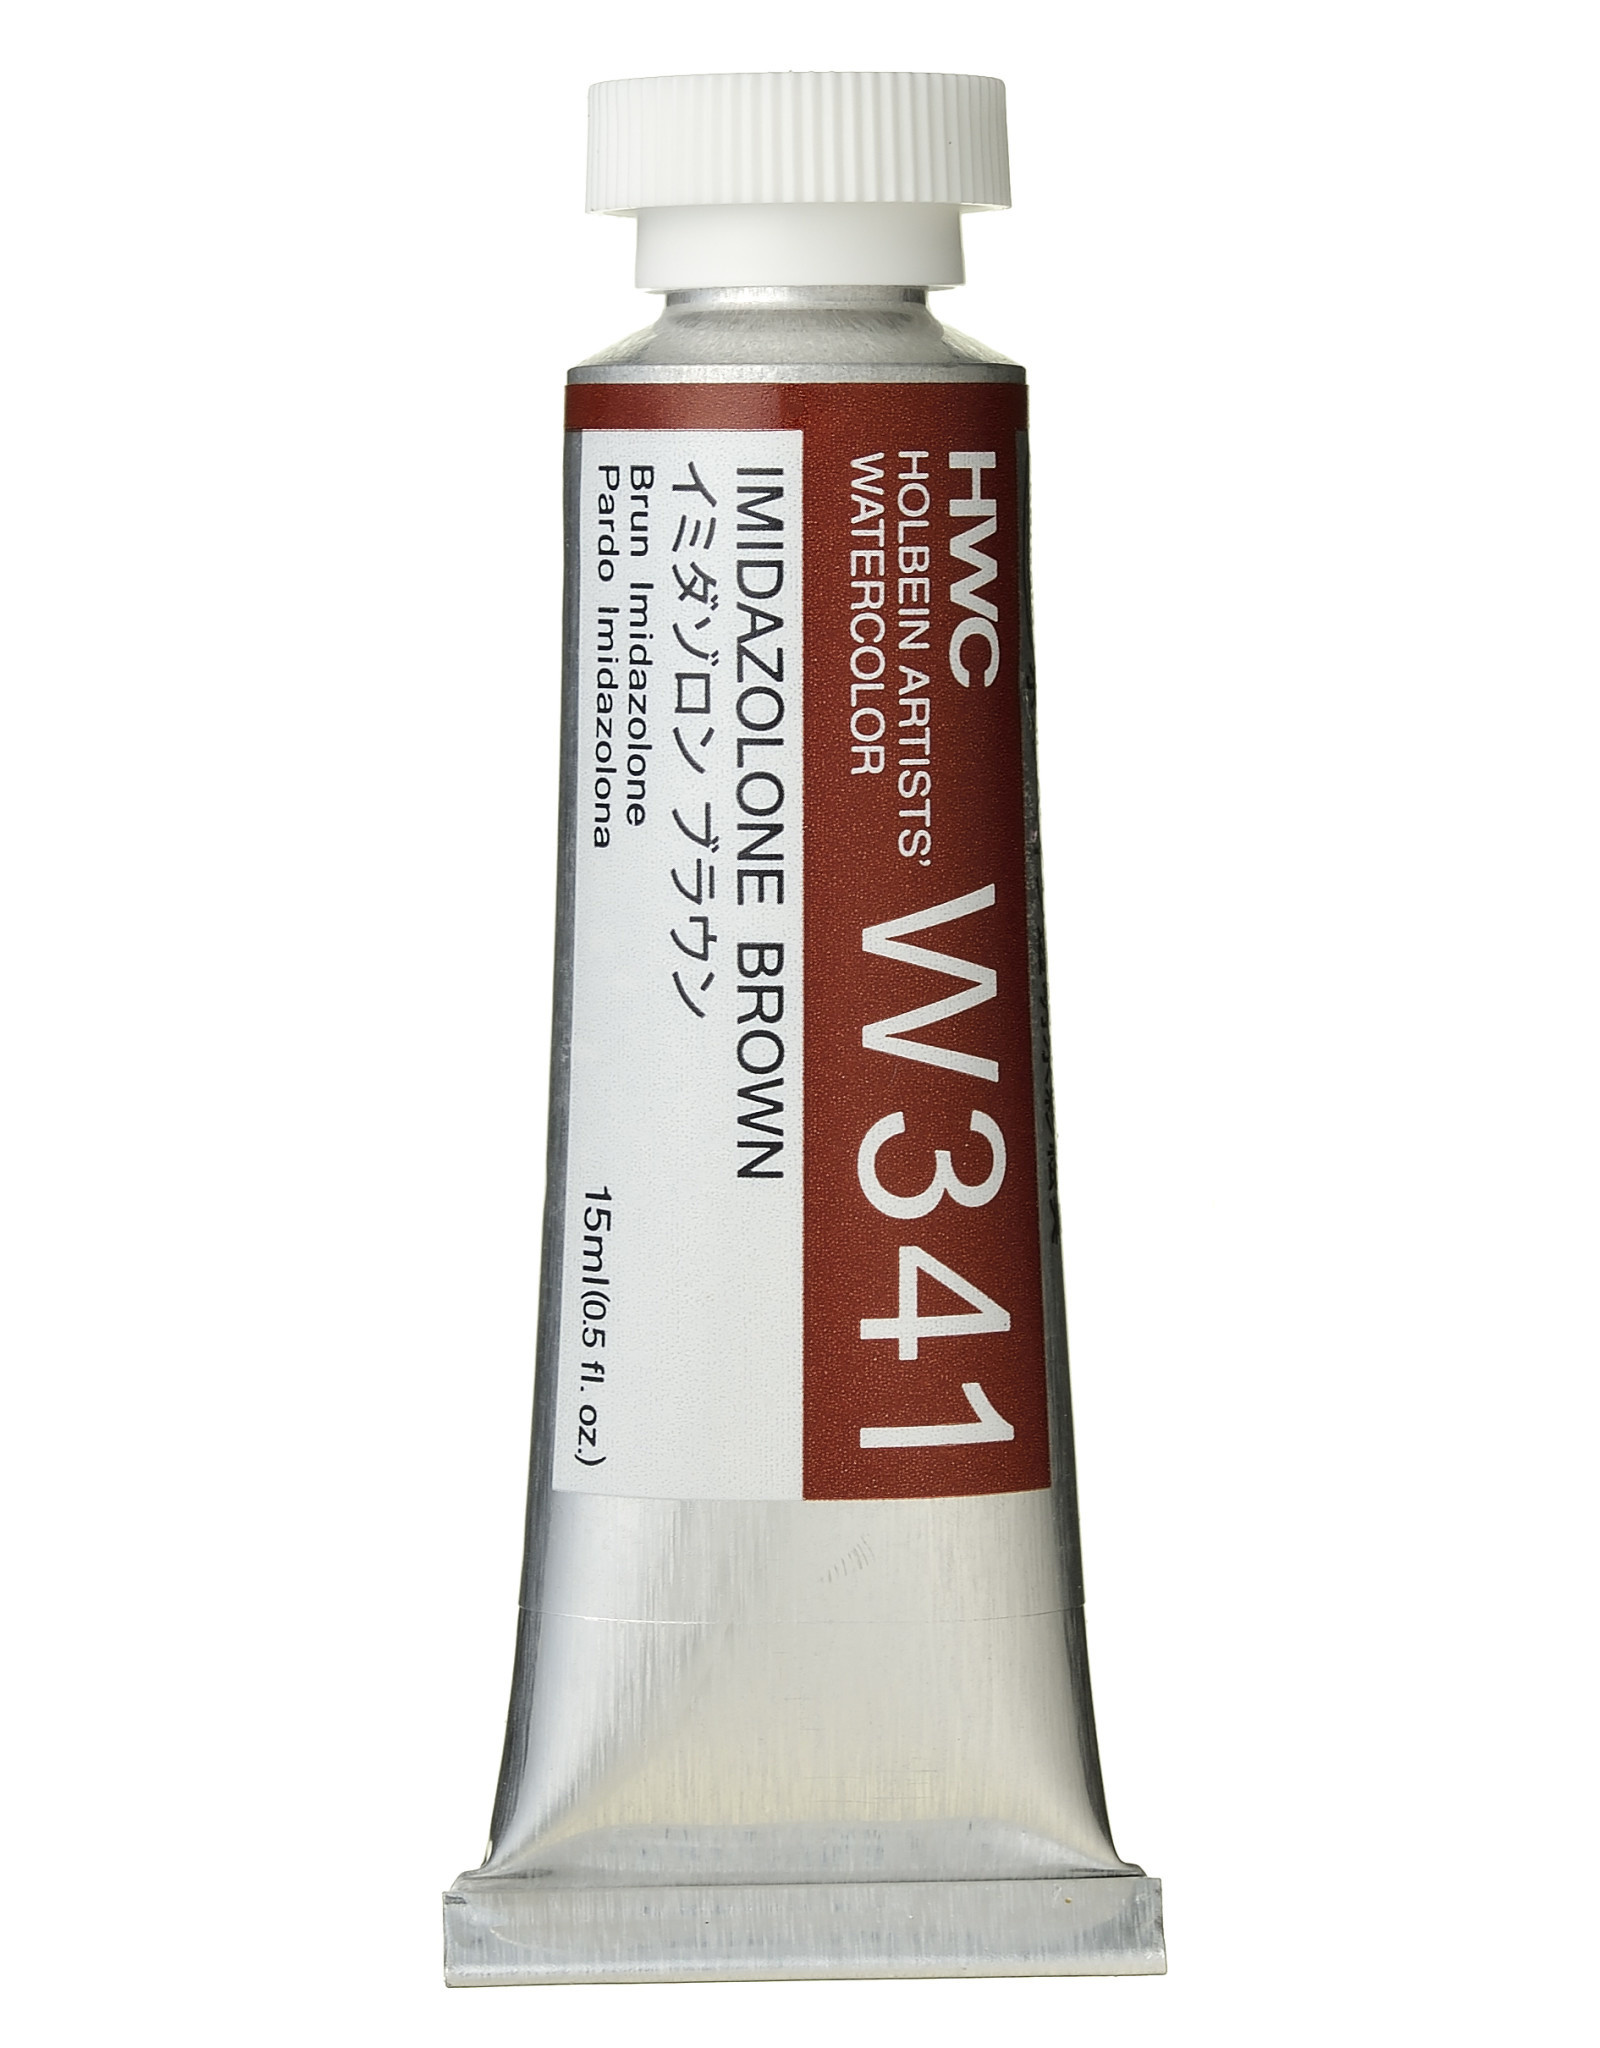 HOLBEIN Holbein Artist’s Watercolor, Imidazolone Brown 15ml